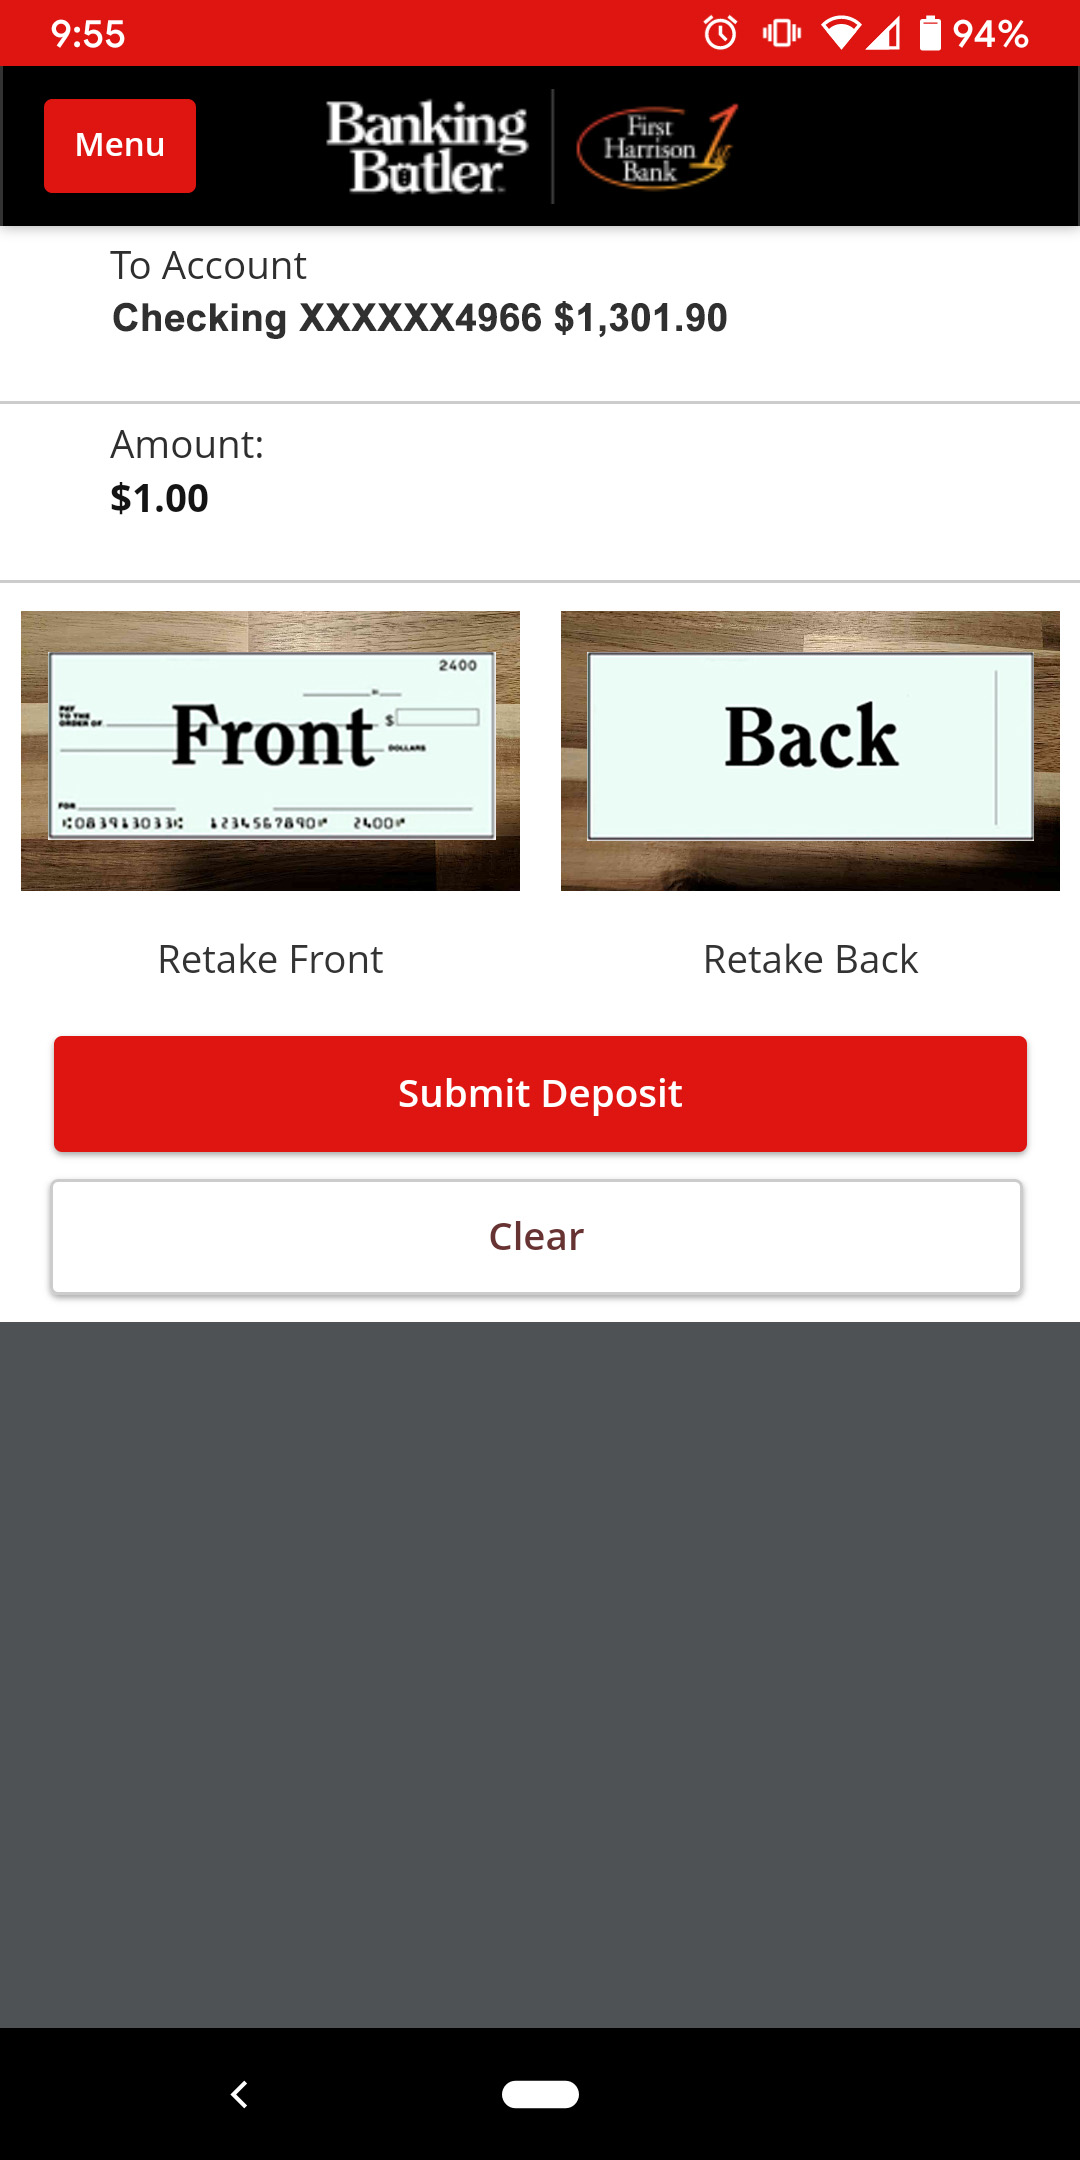 How-To Services - Cinch Deposits Picture of Checks